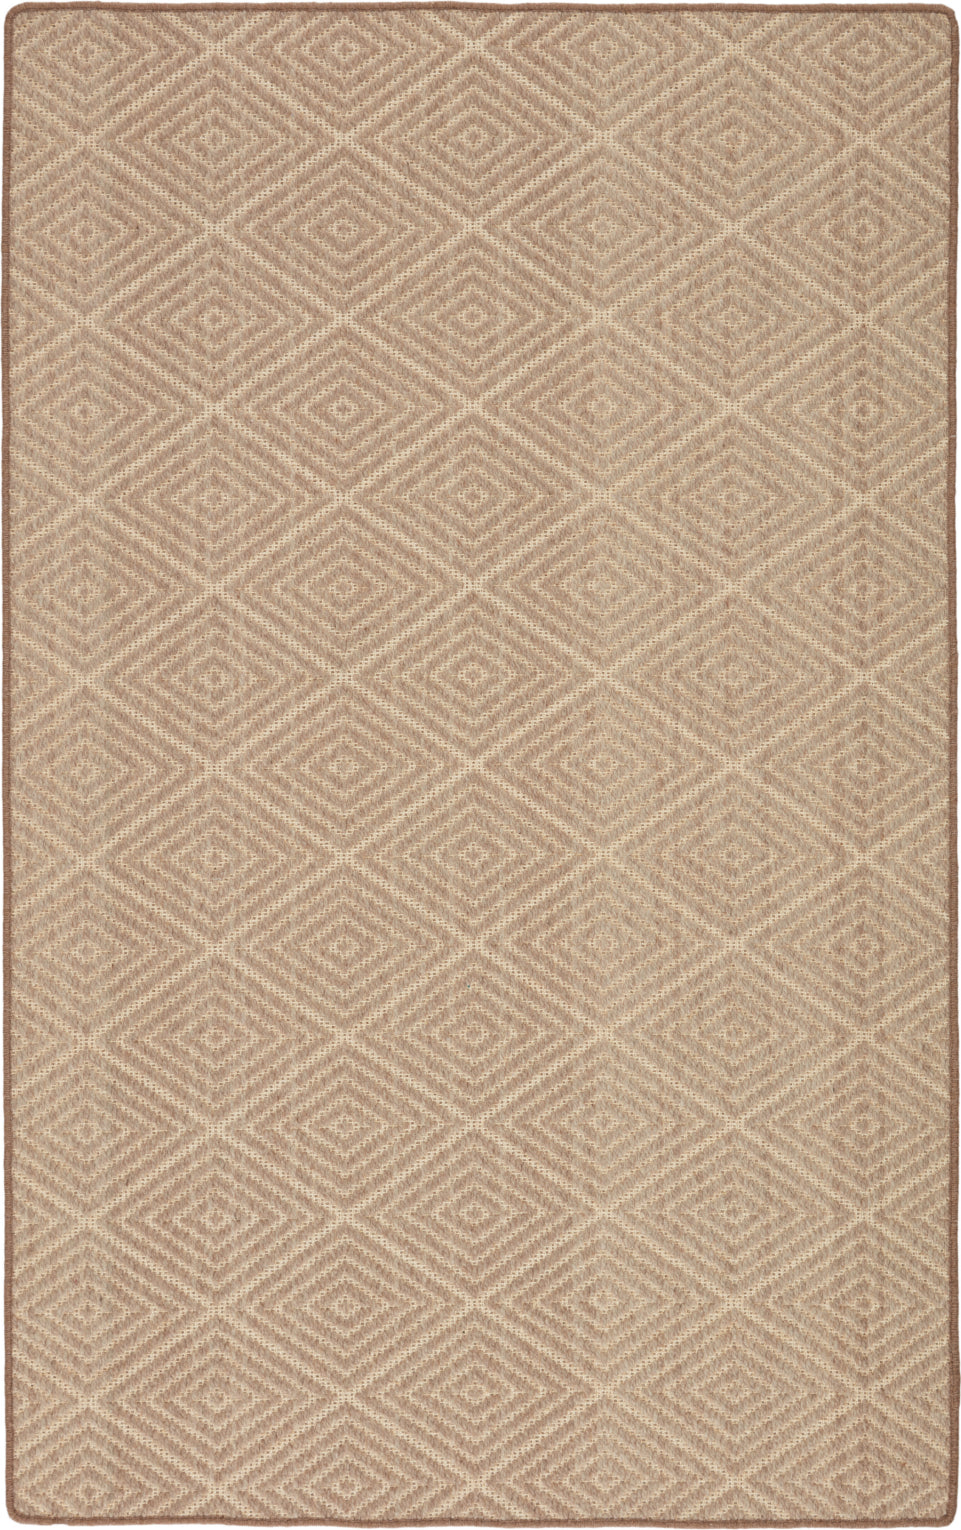 Jaipur Living Newport by Barclay Butera Pacific NBB02 Beige/Light Gray Area Rug - Top Down